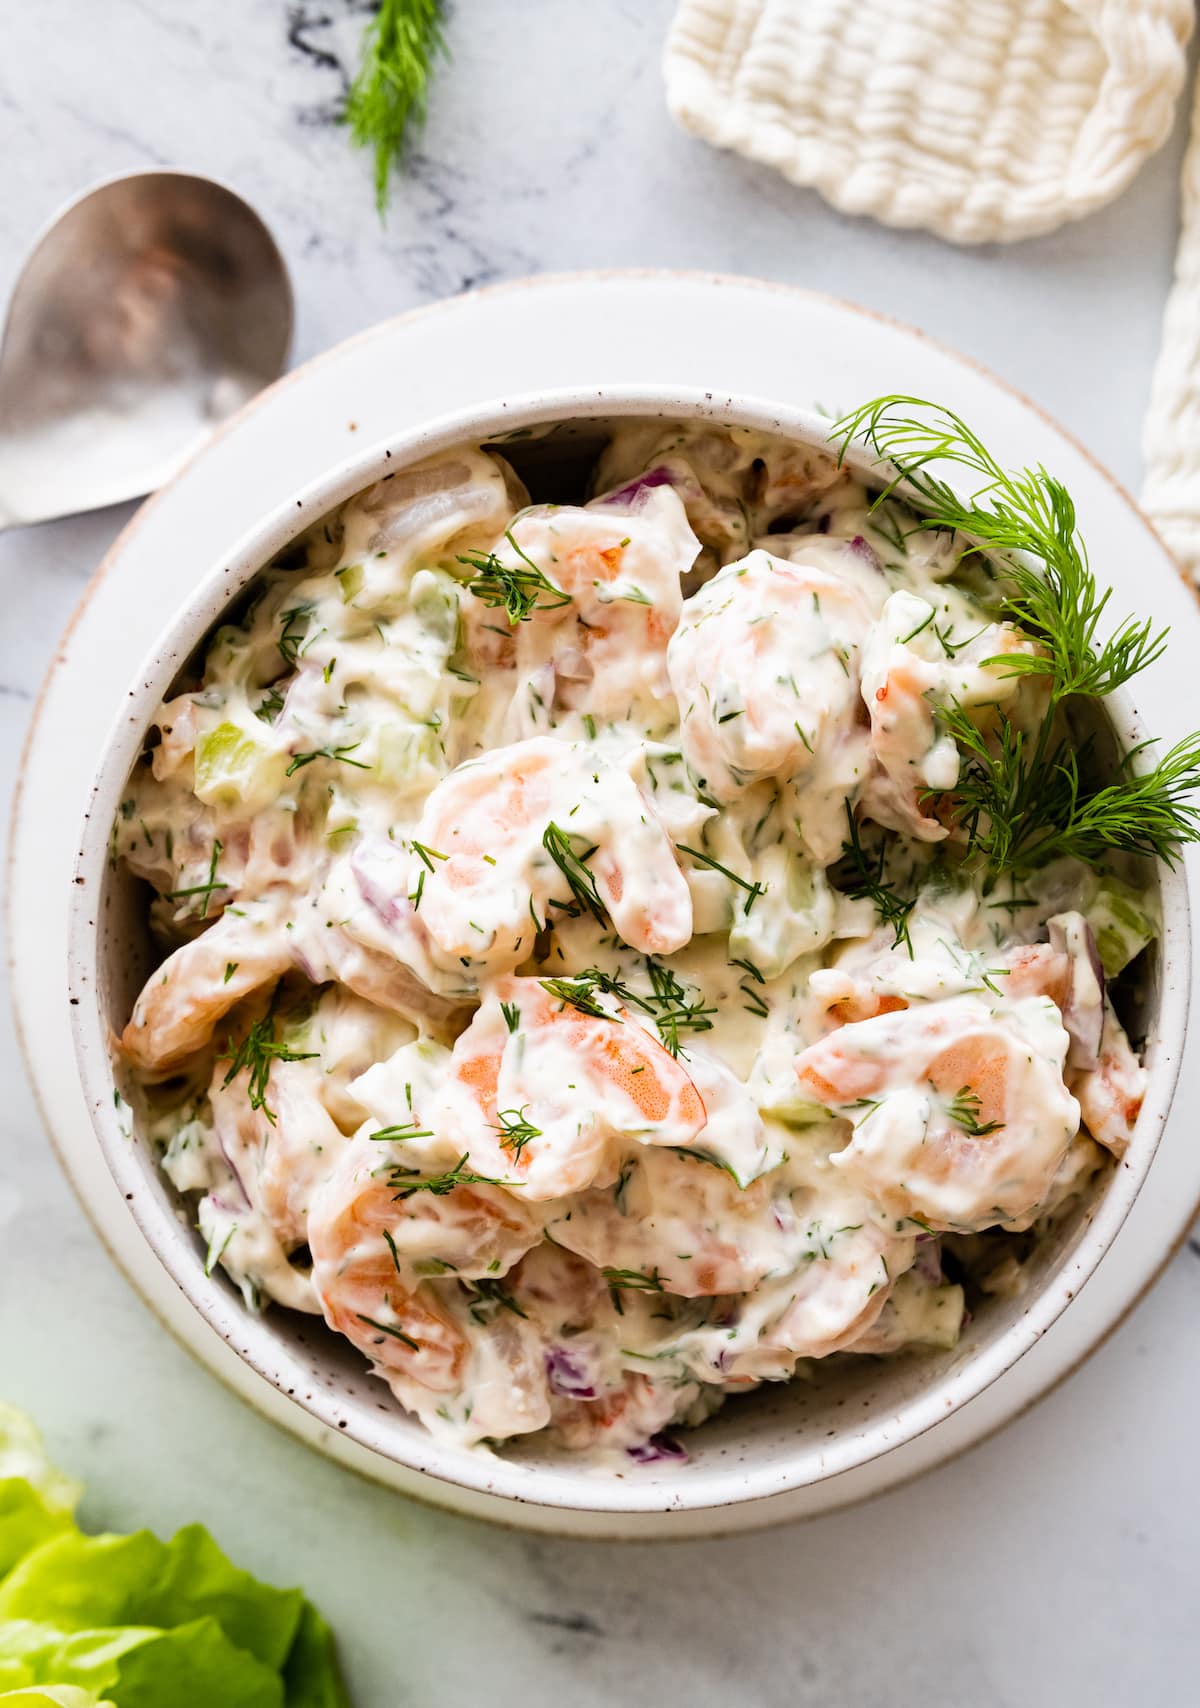 Shrimp salad in a serving bowl topped with fresh dill.